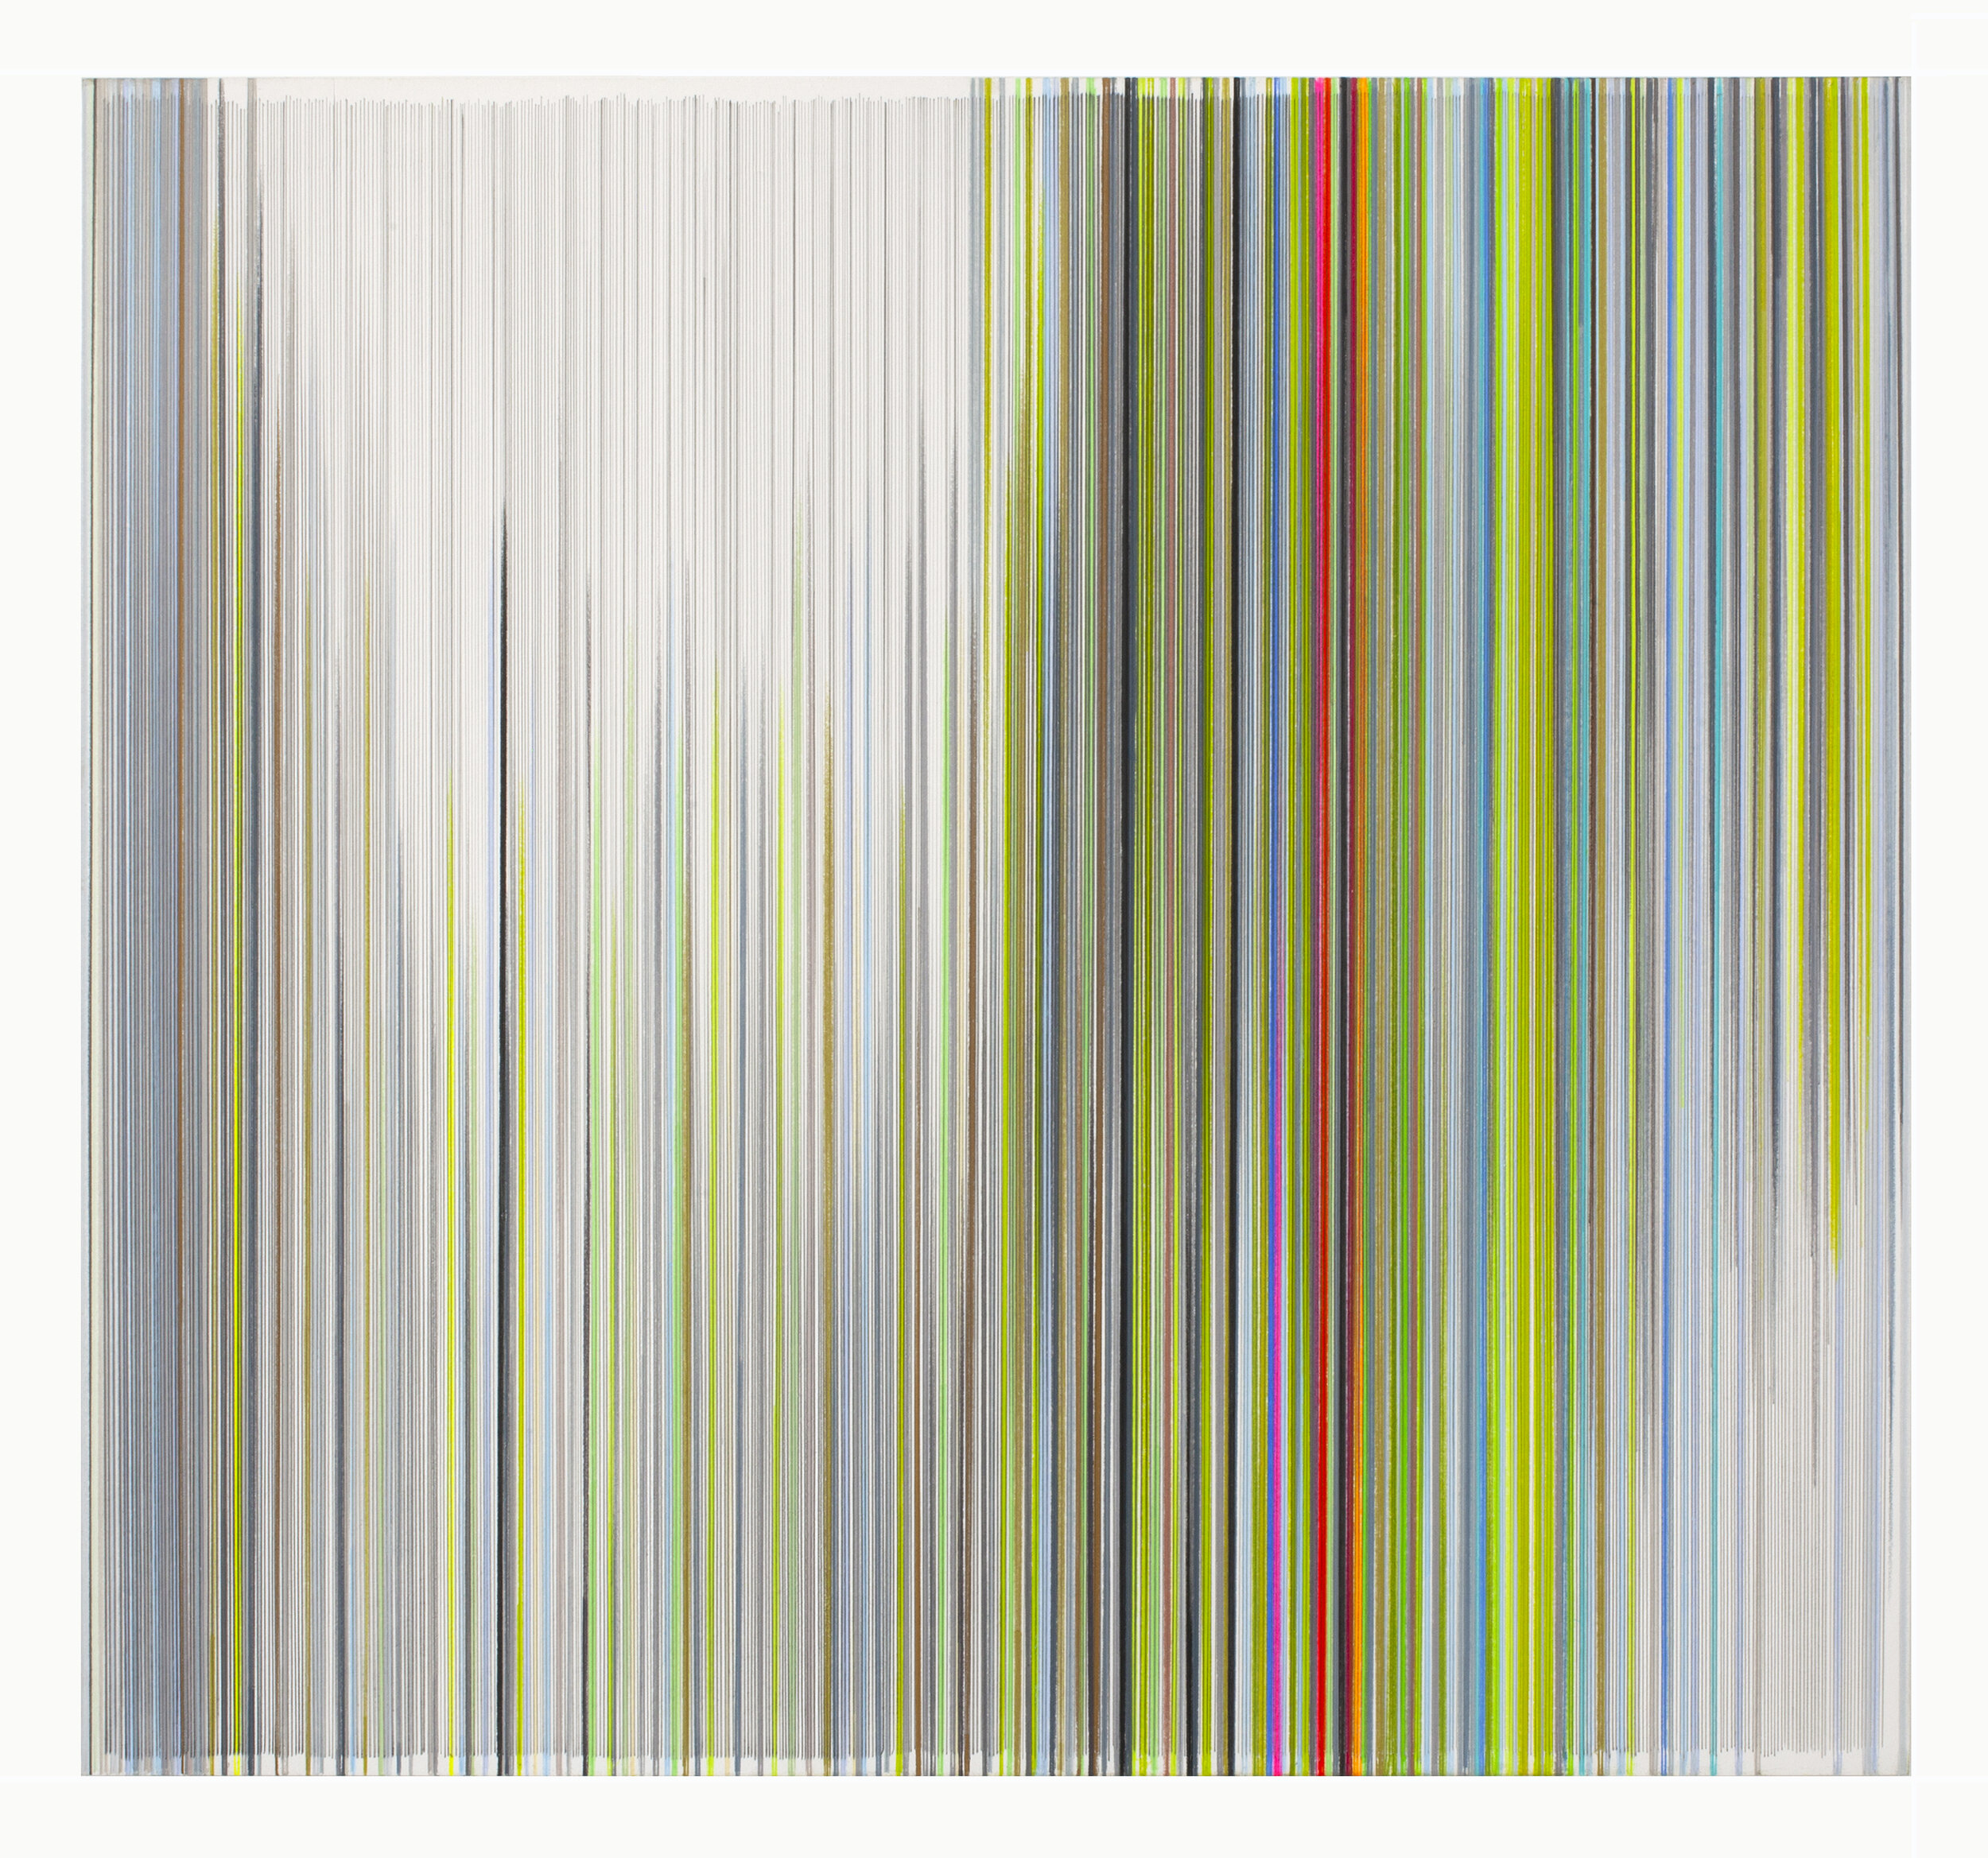    flash: memory   2021 graphite and colored pencil on mat board 24 by 26 inches included in   Everyday   at Haw Contemporary June 18 - August 6, 2021 